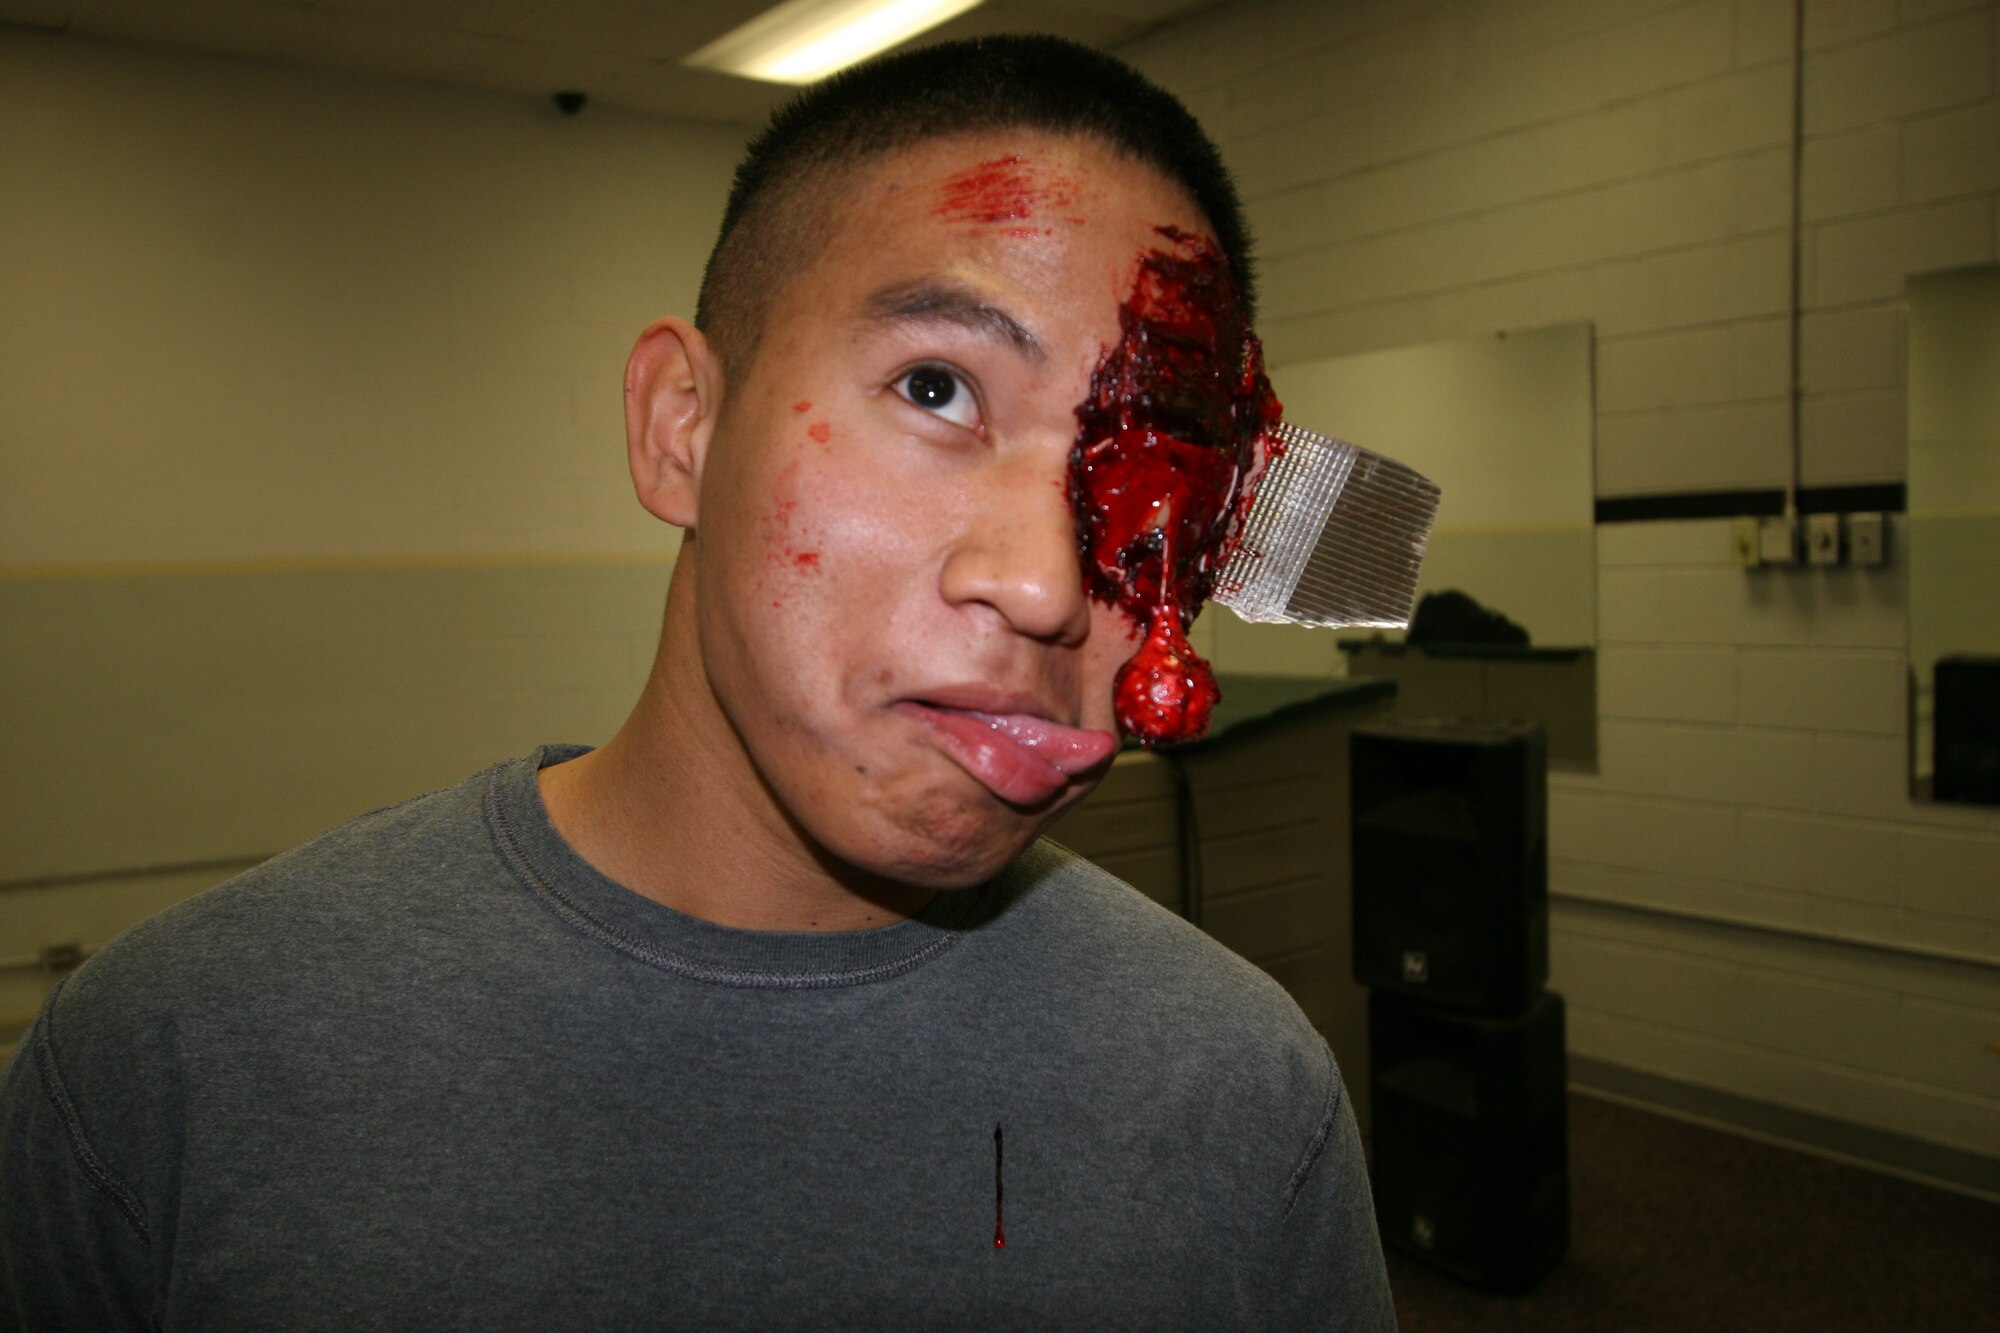 HILL AIR FORCE BASE, Utah--Despite his gory appearance, Senior Airman Ivan Ferrer, 75th Medical Support Squadron, has some fun with being a moulage vicitim. (U.S. Air Force photo by Beth Young)